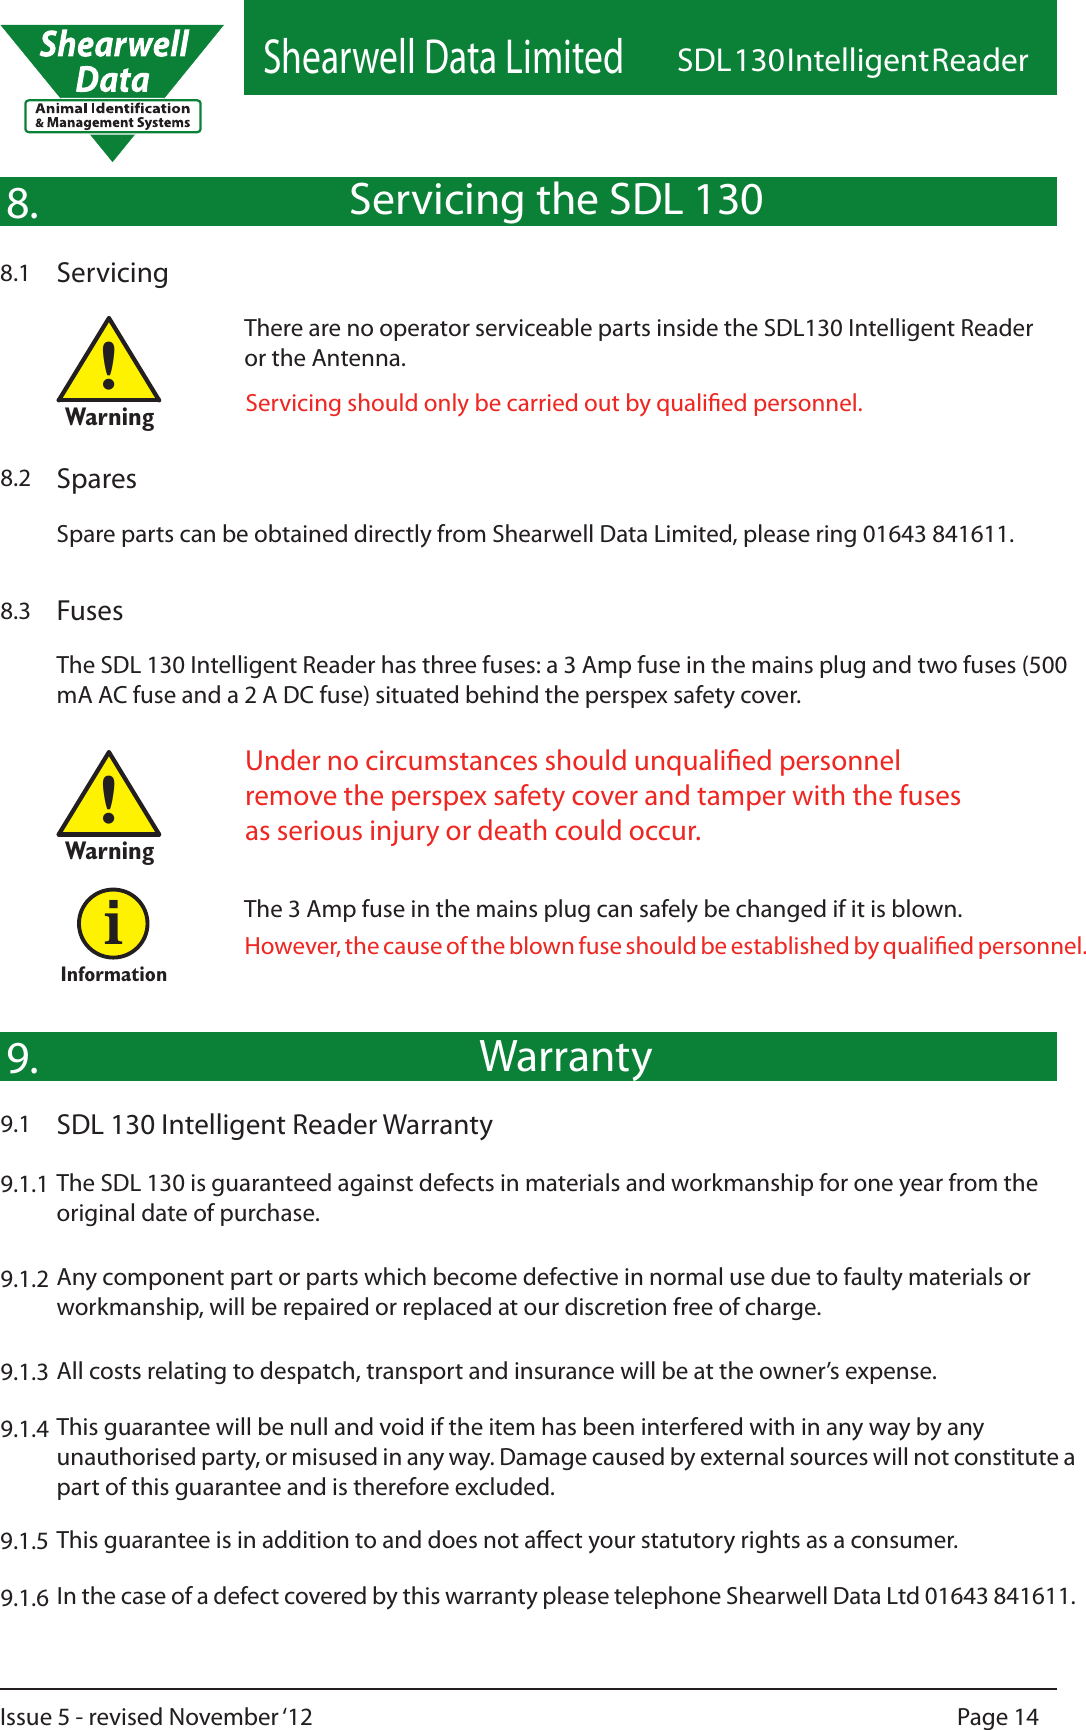 Shearwell Data LimitedSDL 130 Intelligent ReaderPage 14Issue 5 - revised November ‘12WarrantySDL 130 Intelligent Reader Warranty9.1The SDL 130 is guaranteed against defects in materials and workmanship for one year from the original date of purchase.9.9.1.19.1.29.1.39.1.5Any component part or parts which become defective in normal use due to faulty materials or workmanship, will be repaired or replaced at our discretion free of charge.All costs relating to despatch, transport and insurance will be at the owner’s expense.This guarantee is in addition to and does not aect your statutory rights as a consumer.9.1.6 In the case of a defect covered by this warranty please telephone Shearwell Data Ltd 01643 841611.9.1.4 This guarantee will be null and void if the item has been interfered with in any way by any unauthorised party, or misused in any way. Damage caused by external sources will not constitute a part of this guarantee and is therefore excluded.Servicing the SDL 130Servicing8.1Servicing should only be carried out by qualied personnel.8.Spares8.2Spare parts can be obtained directly from Shearwell Data Limited, please ring 01643 841611.FusesUnder no circumstances should unqualied personnel remove the perspex safety cover and tamper with the fuses as serious injury or death could occur.!Warning!Warning8.3The SDL 130 Intelligent Reader has three fuses: a 3 Amp fuse in the mains plug and two fuses (500 mA AC fuse and a 2 A DC fuse) situated behind the perspex safety cover.InformationiThe 3 Amp fuse in the mains plug can safely be changed if it is blown.However, the cause of the blown fuse should be established by qualied personnel.There are no operator serviceable parts inside the SDL130 Intelligent Reader or the Antenna.